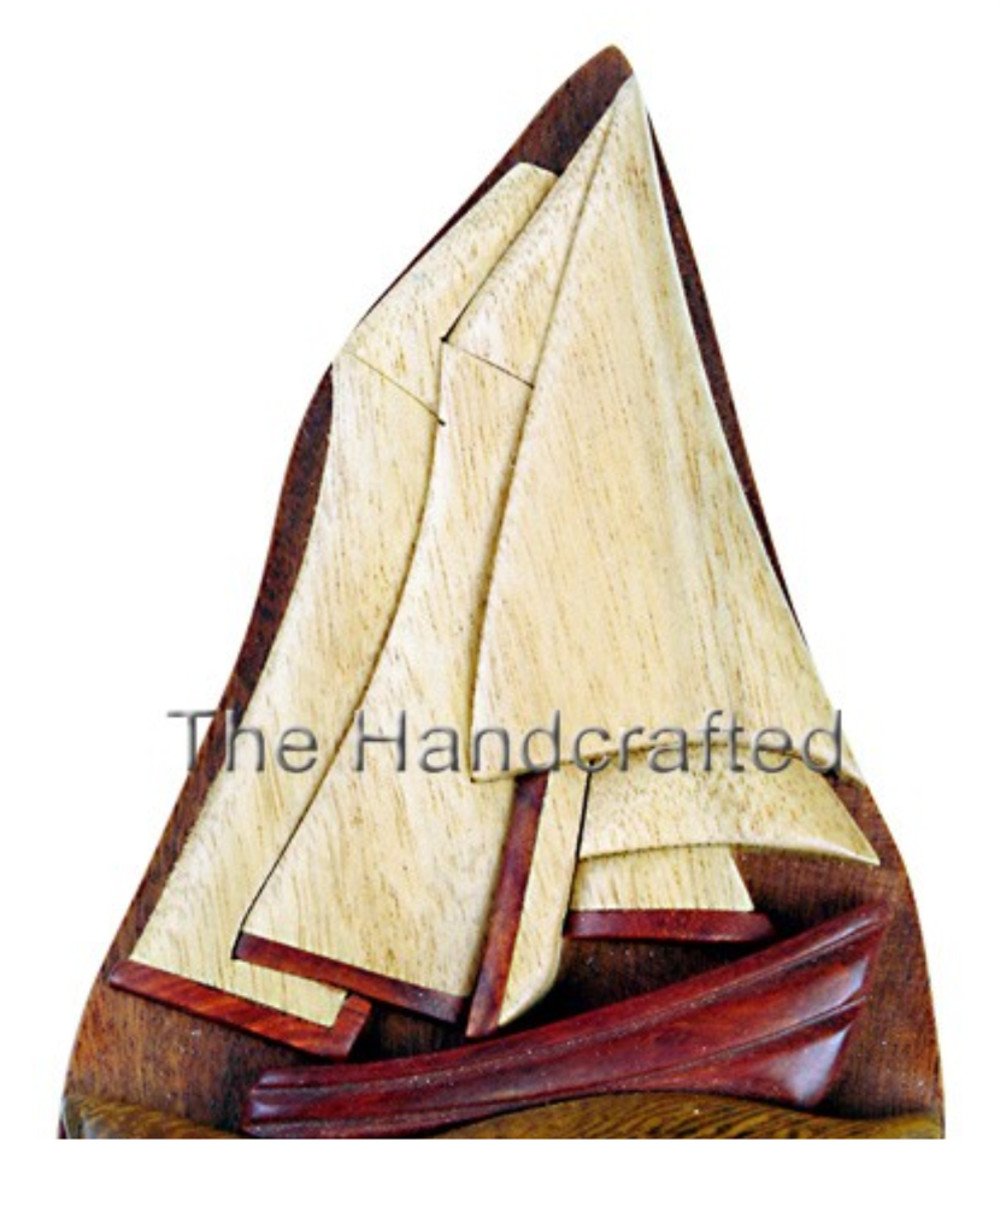 Hand-Carved-in-Vietnam-Wood-Sailboat-Puzzle-Box-Intarsia-Wood.